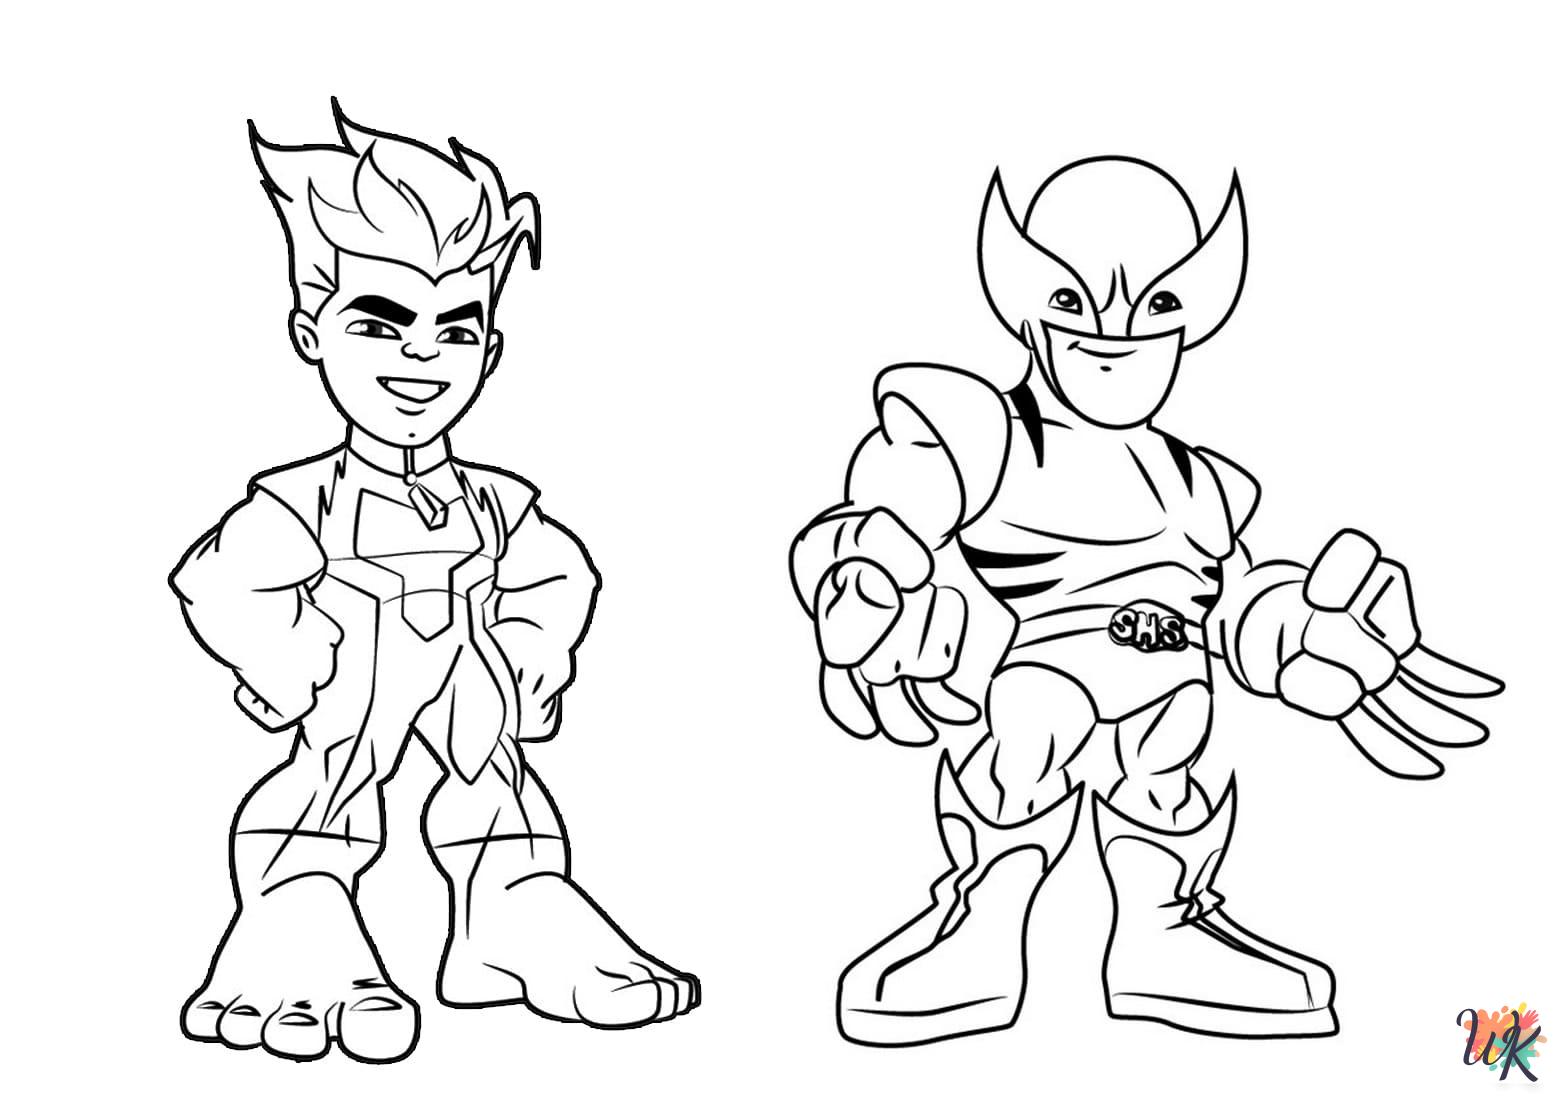 Wolverine coloring pages for adults pdf